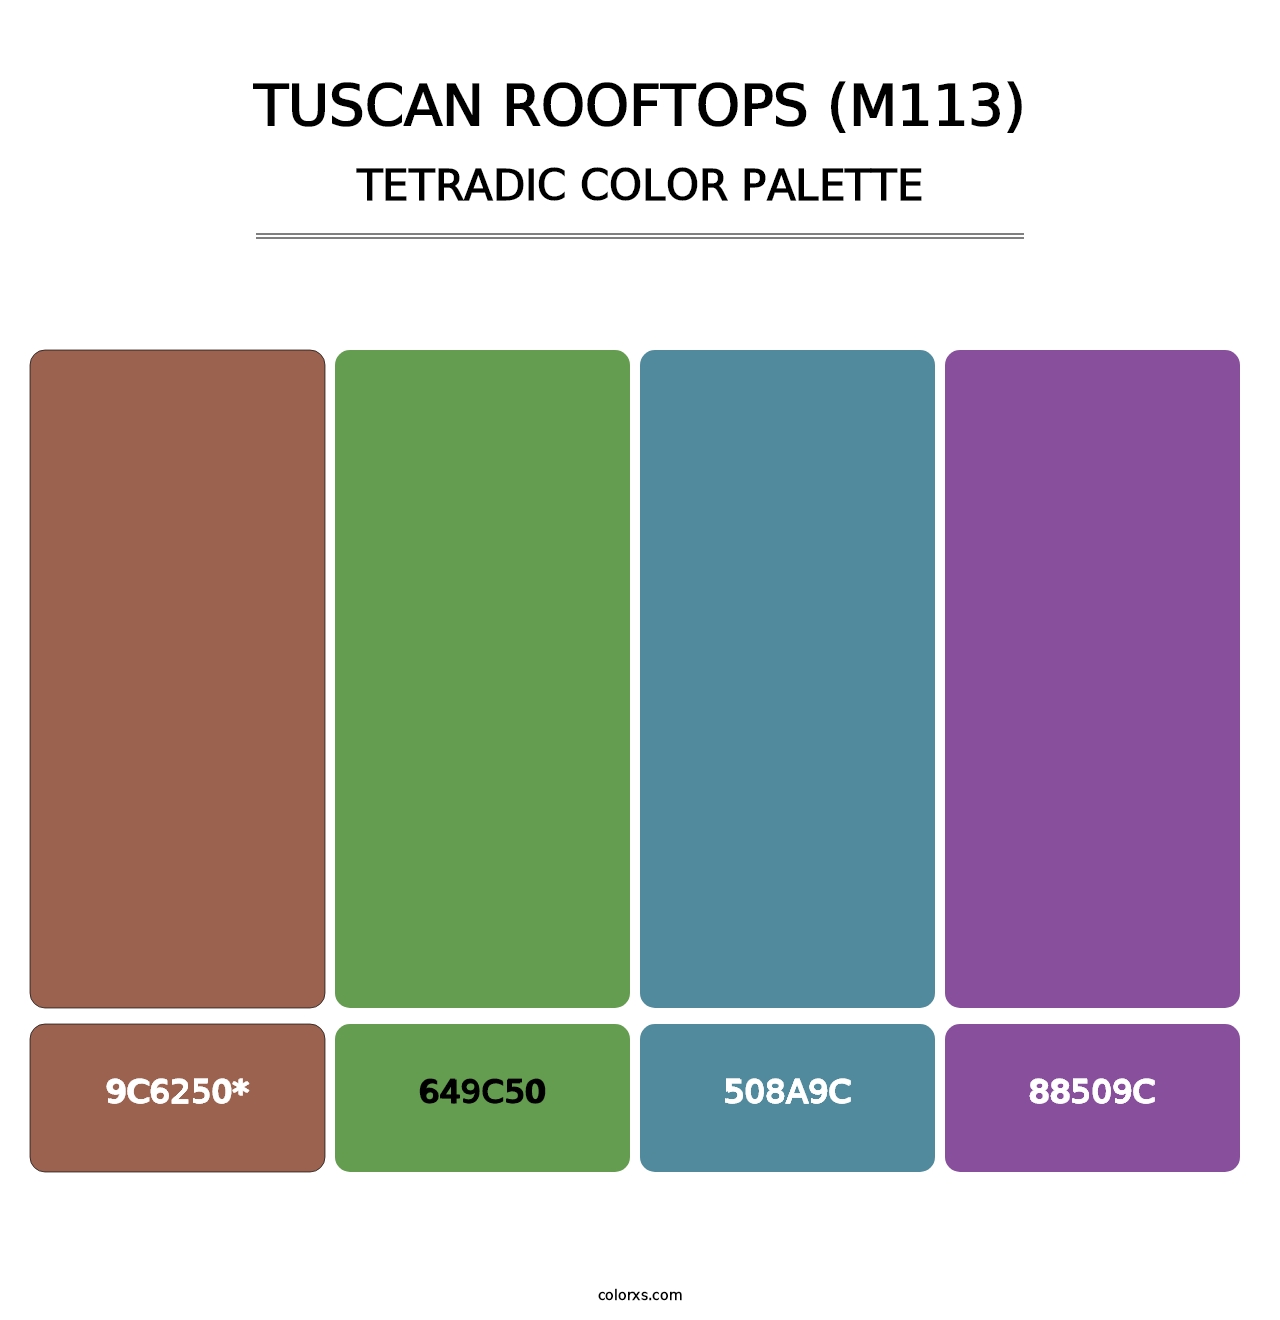 Tuscan Rooftops (M113) - Tetradic Color Palette